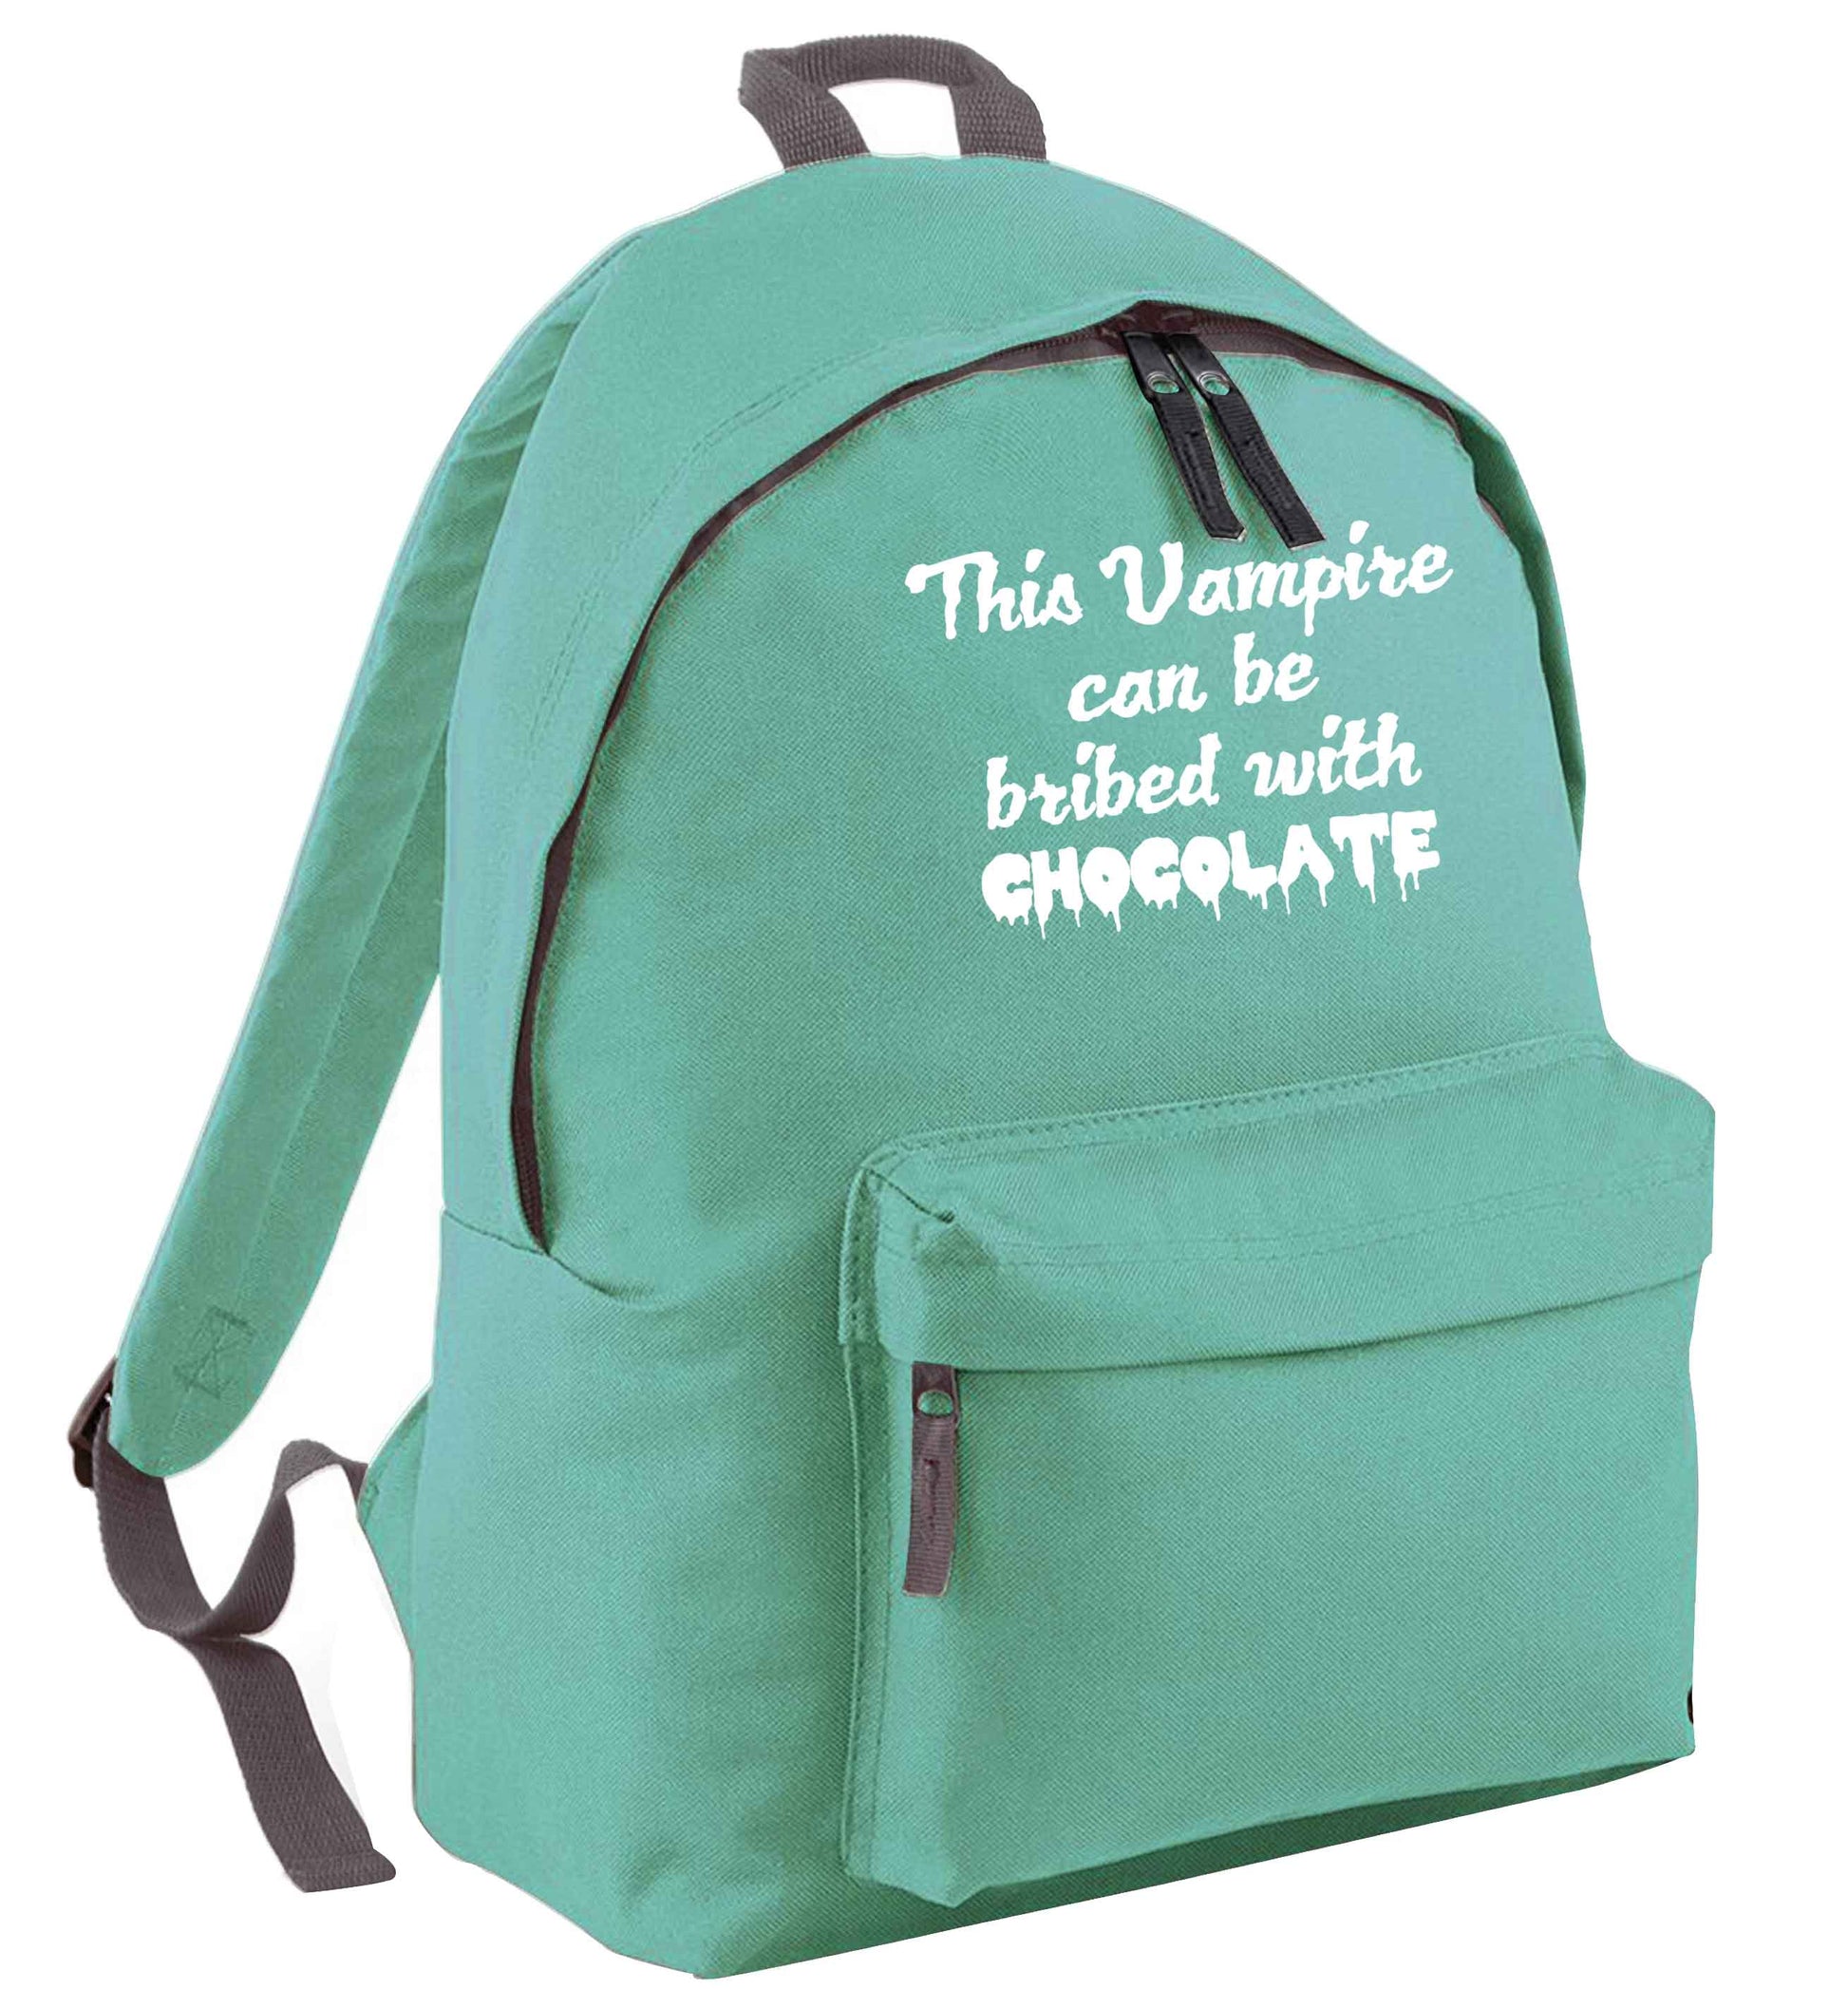 This vampire can be bribed with chocolate mint adults backpack